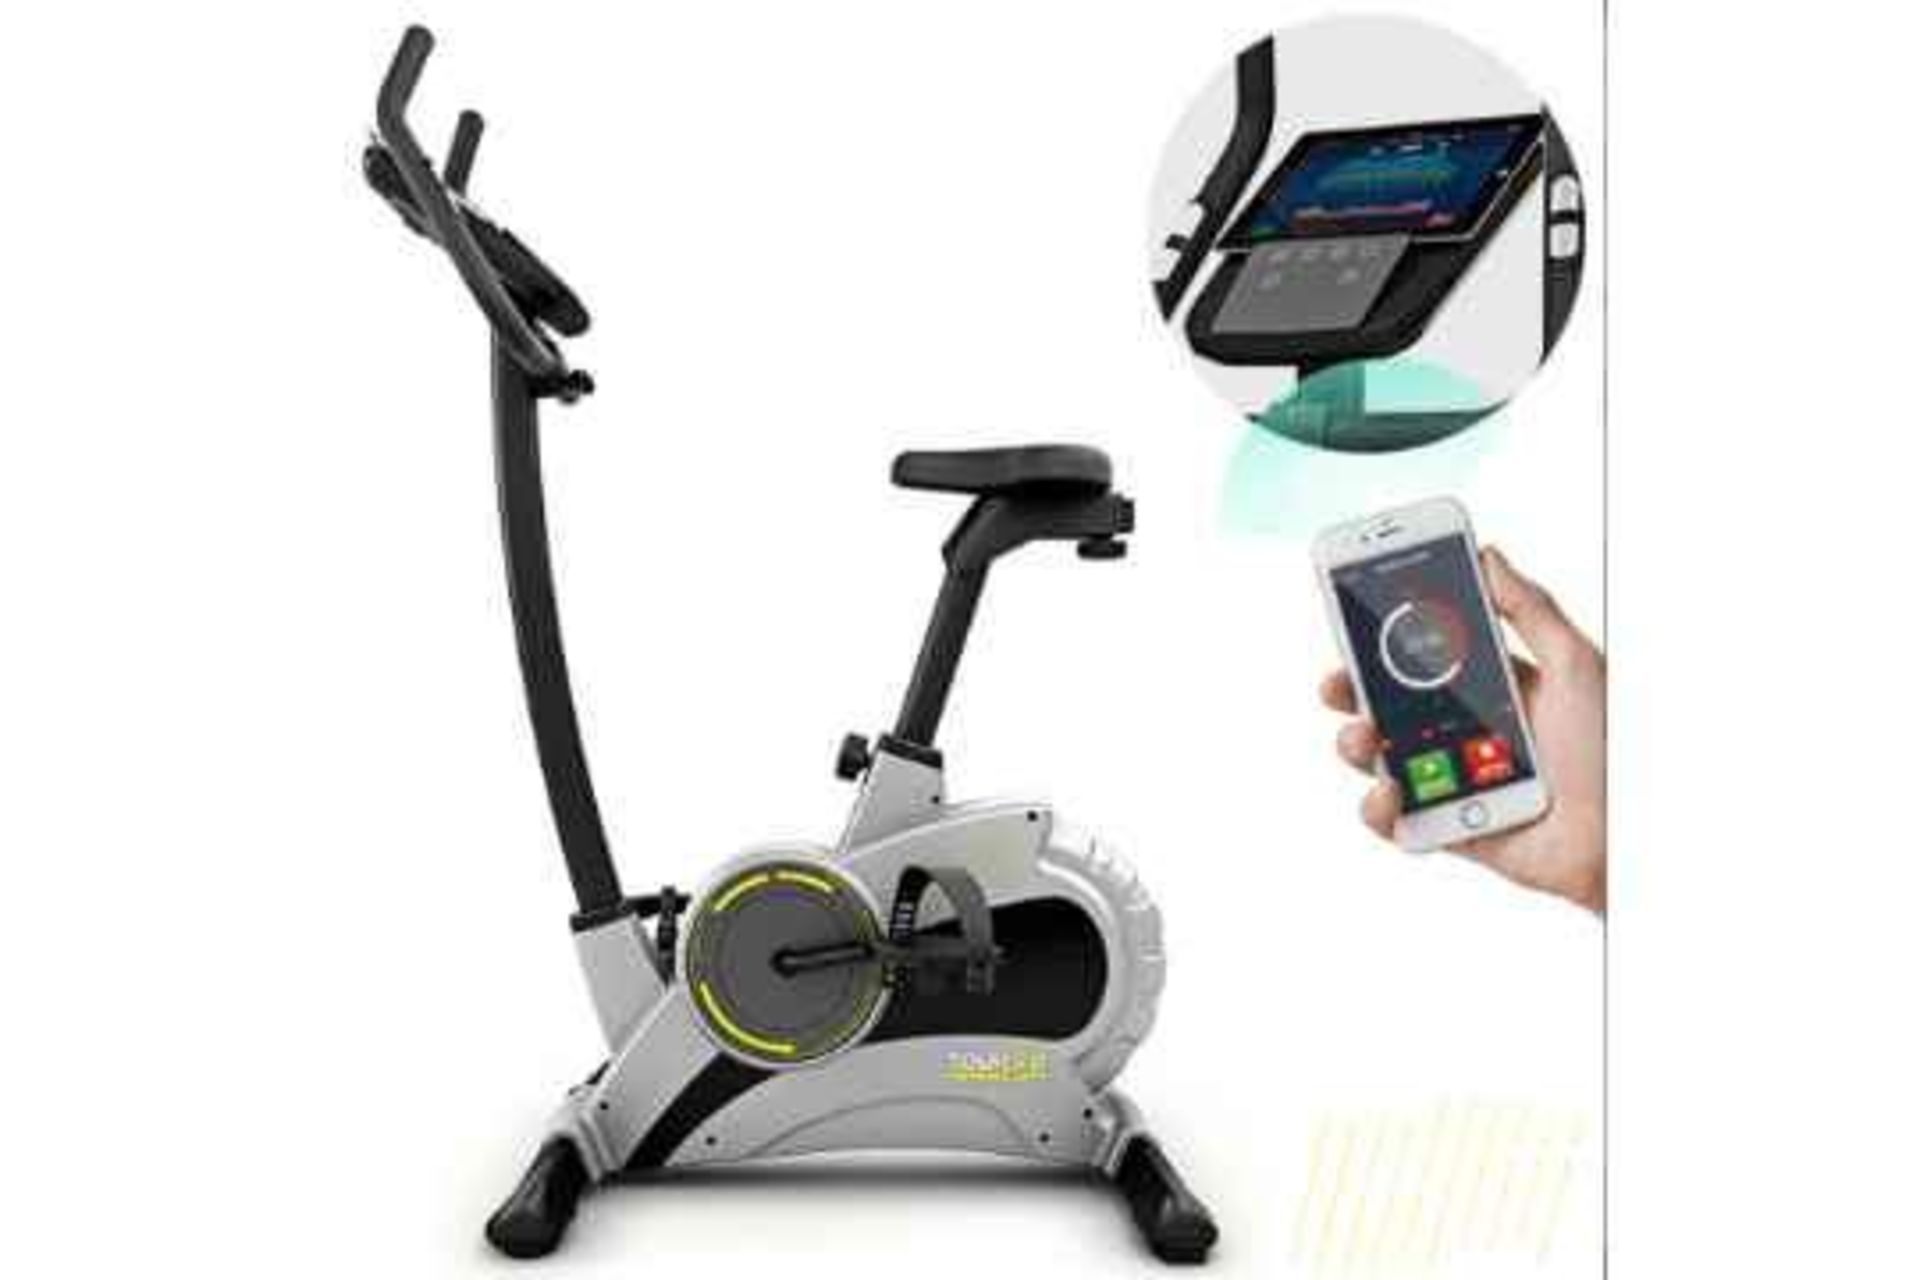 BLUEFIN FITNESS TOUR 5.0 RESISTANCE EXERCISE BIKE RRP £349.00 - Image 7 of 7